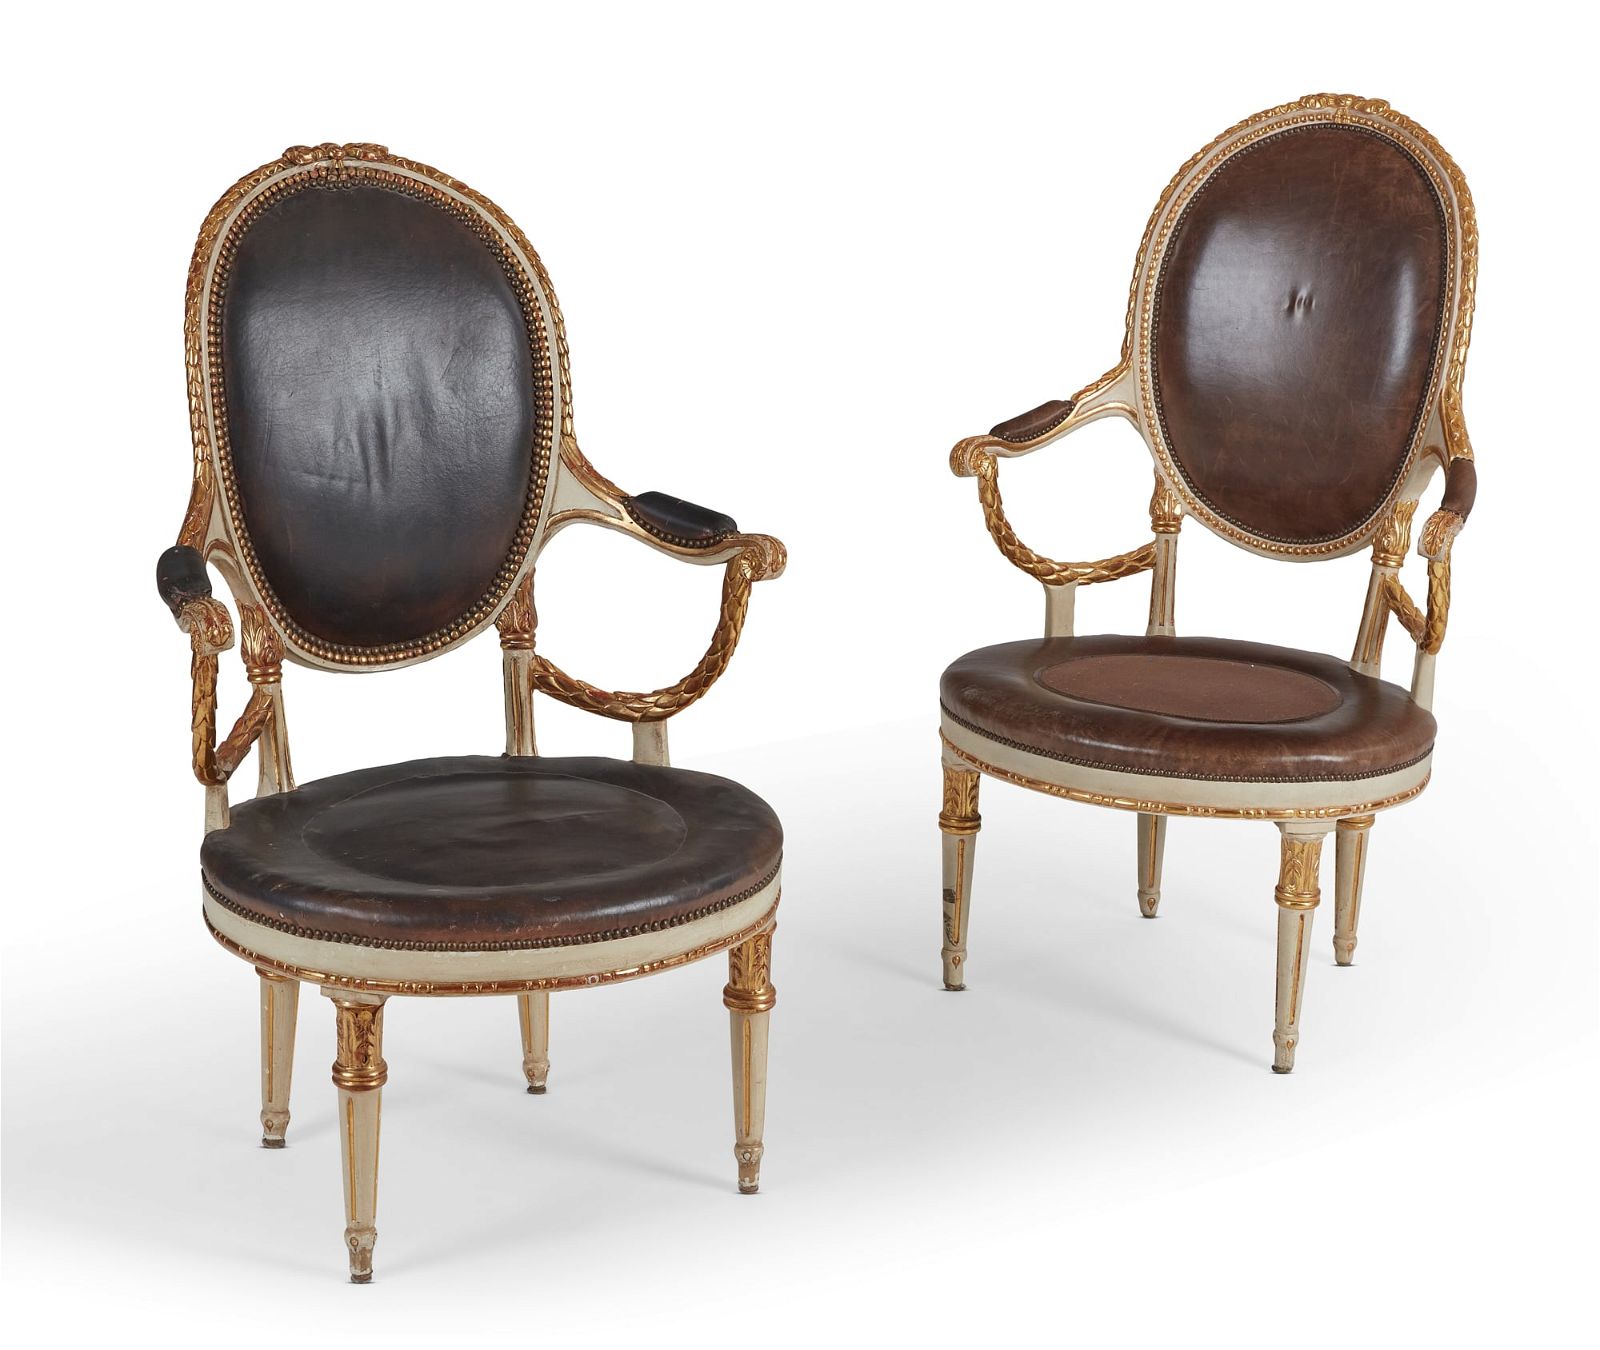 A PAIR OF SWEDISH NEOCLASSICAL